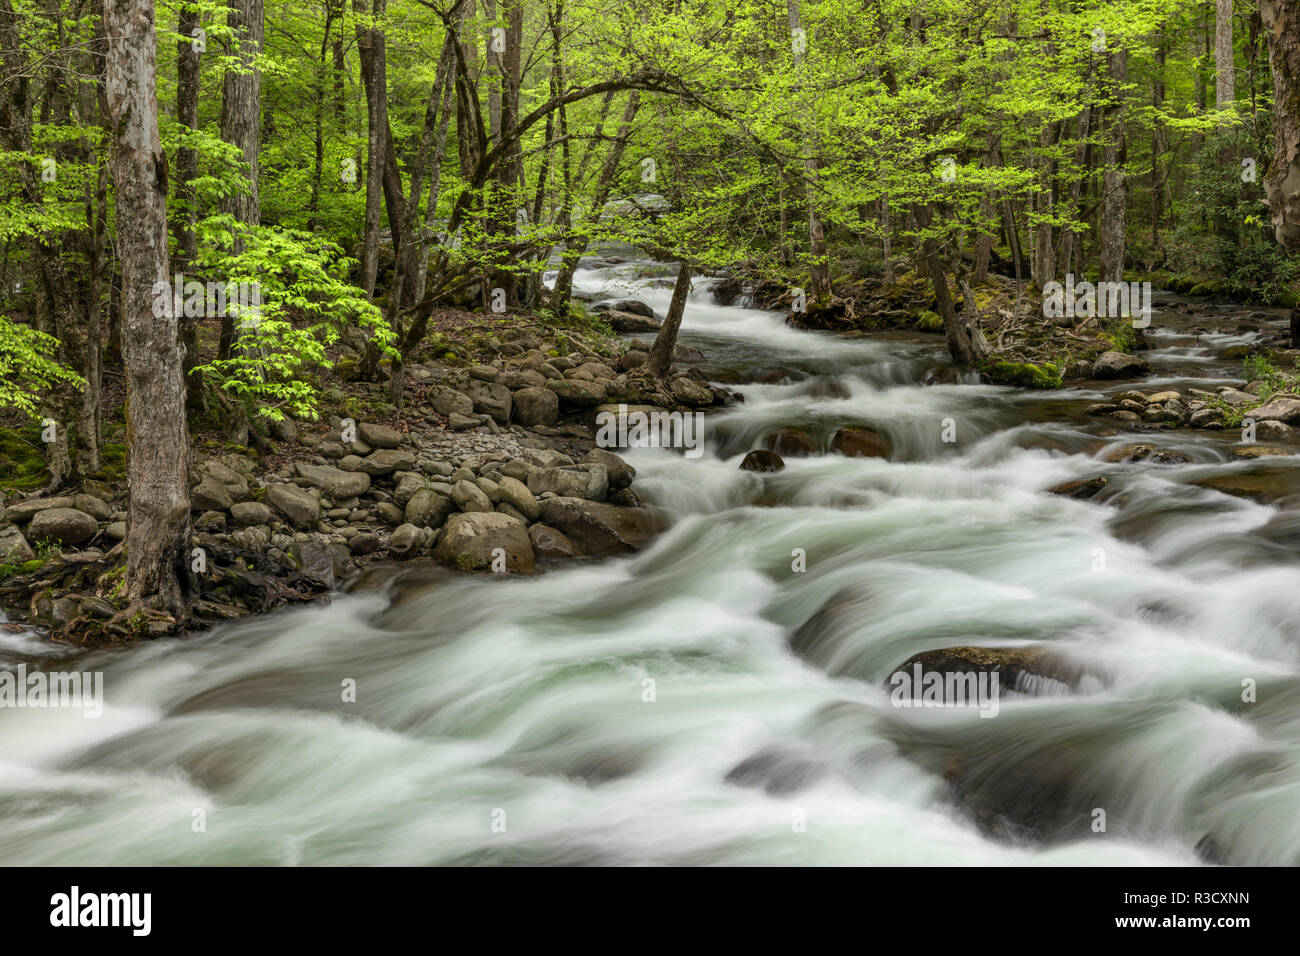 Spring view of Little Pigeon River, Greenbrier, Great Smoky Mountains National Park, Tennessee Stock Photo